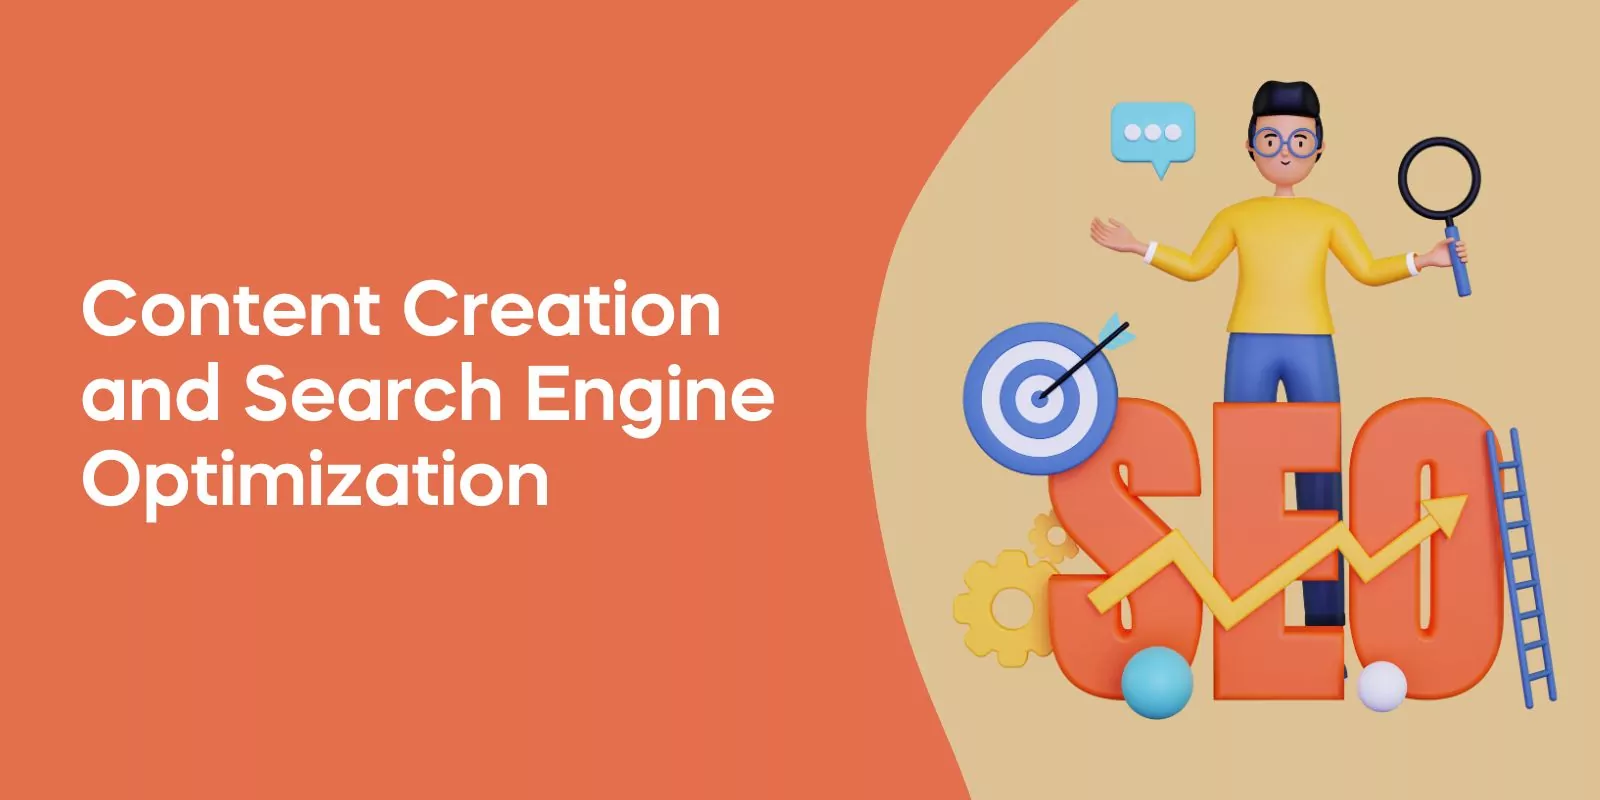 Content Creation and Search Engine Optimization